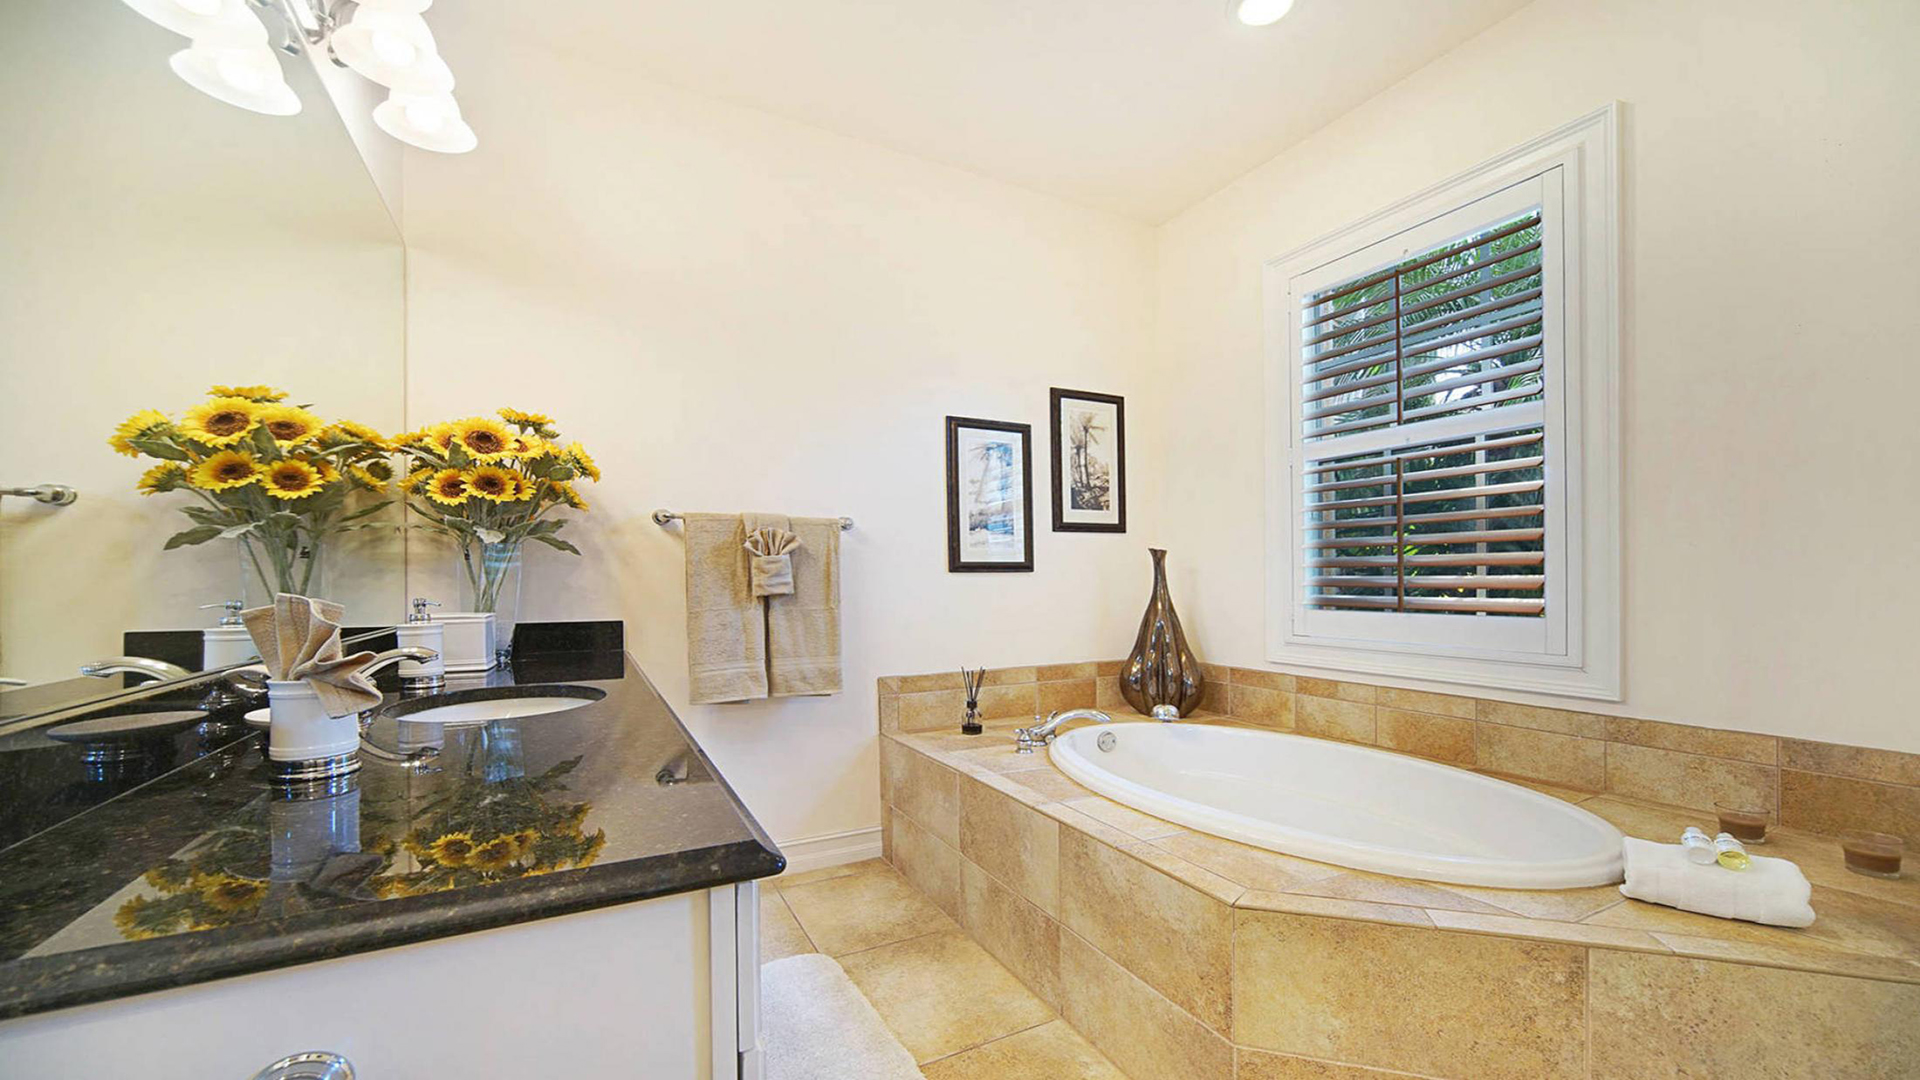 Tub, walk-in shower and sinks are combined in the master bath